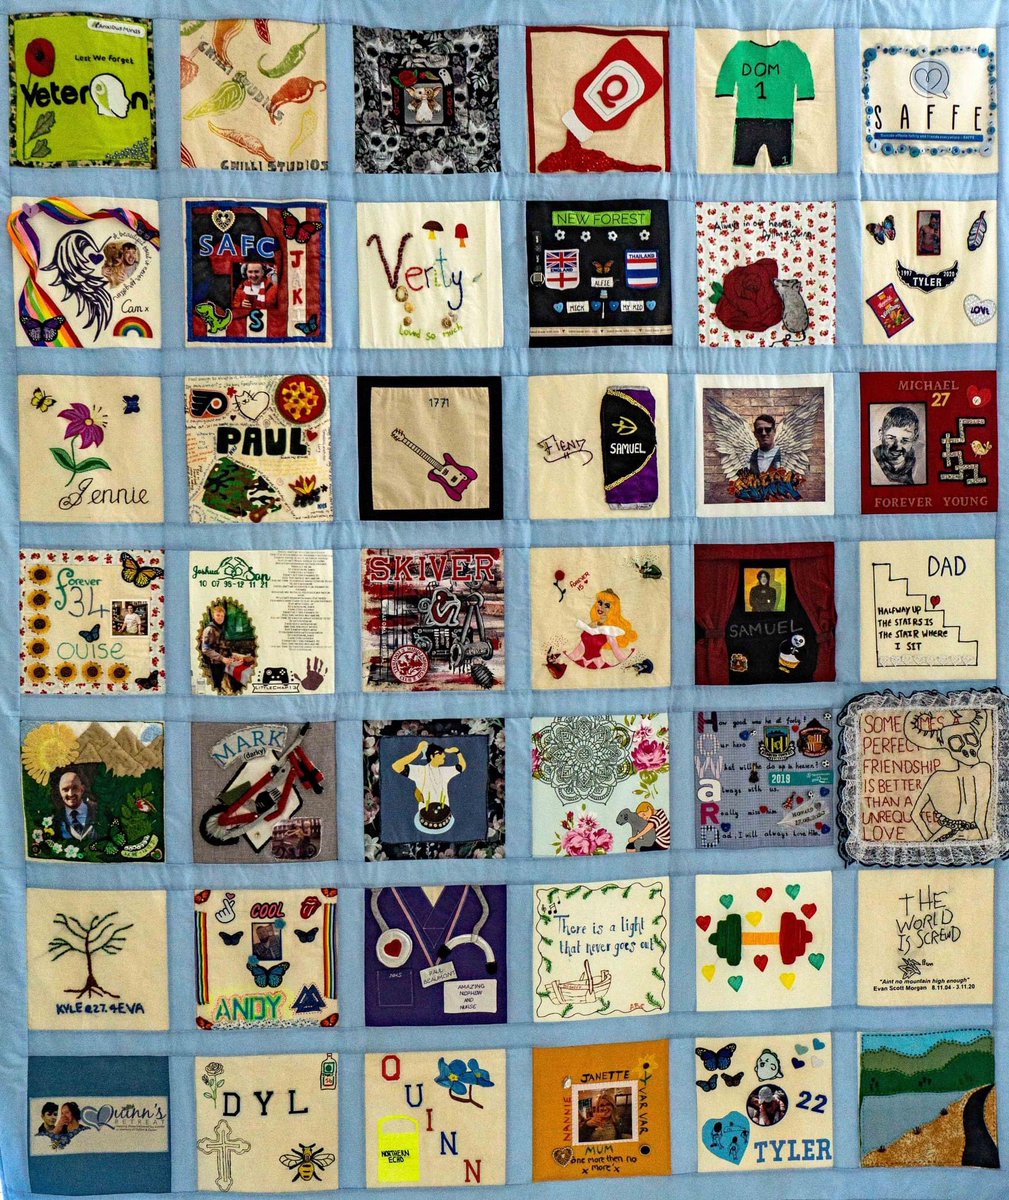 Here is our beautiful North East Speak Their Name suicide memorial quilt on #survivorsofsuicidelossday 120 squares crafted with ❤️ @NorthEast_STN @QuinnsRetreat #Newcastle #sunderland #durham #darlington #teesside